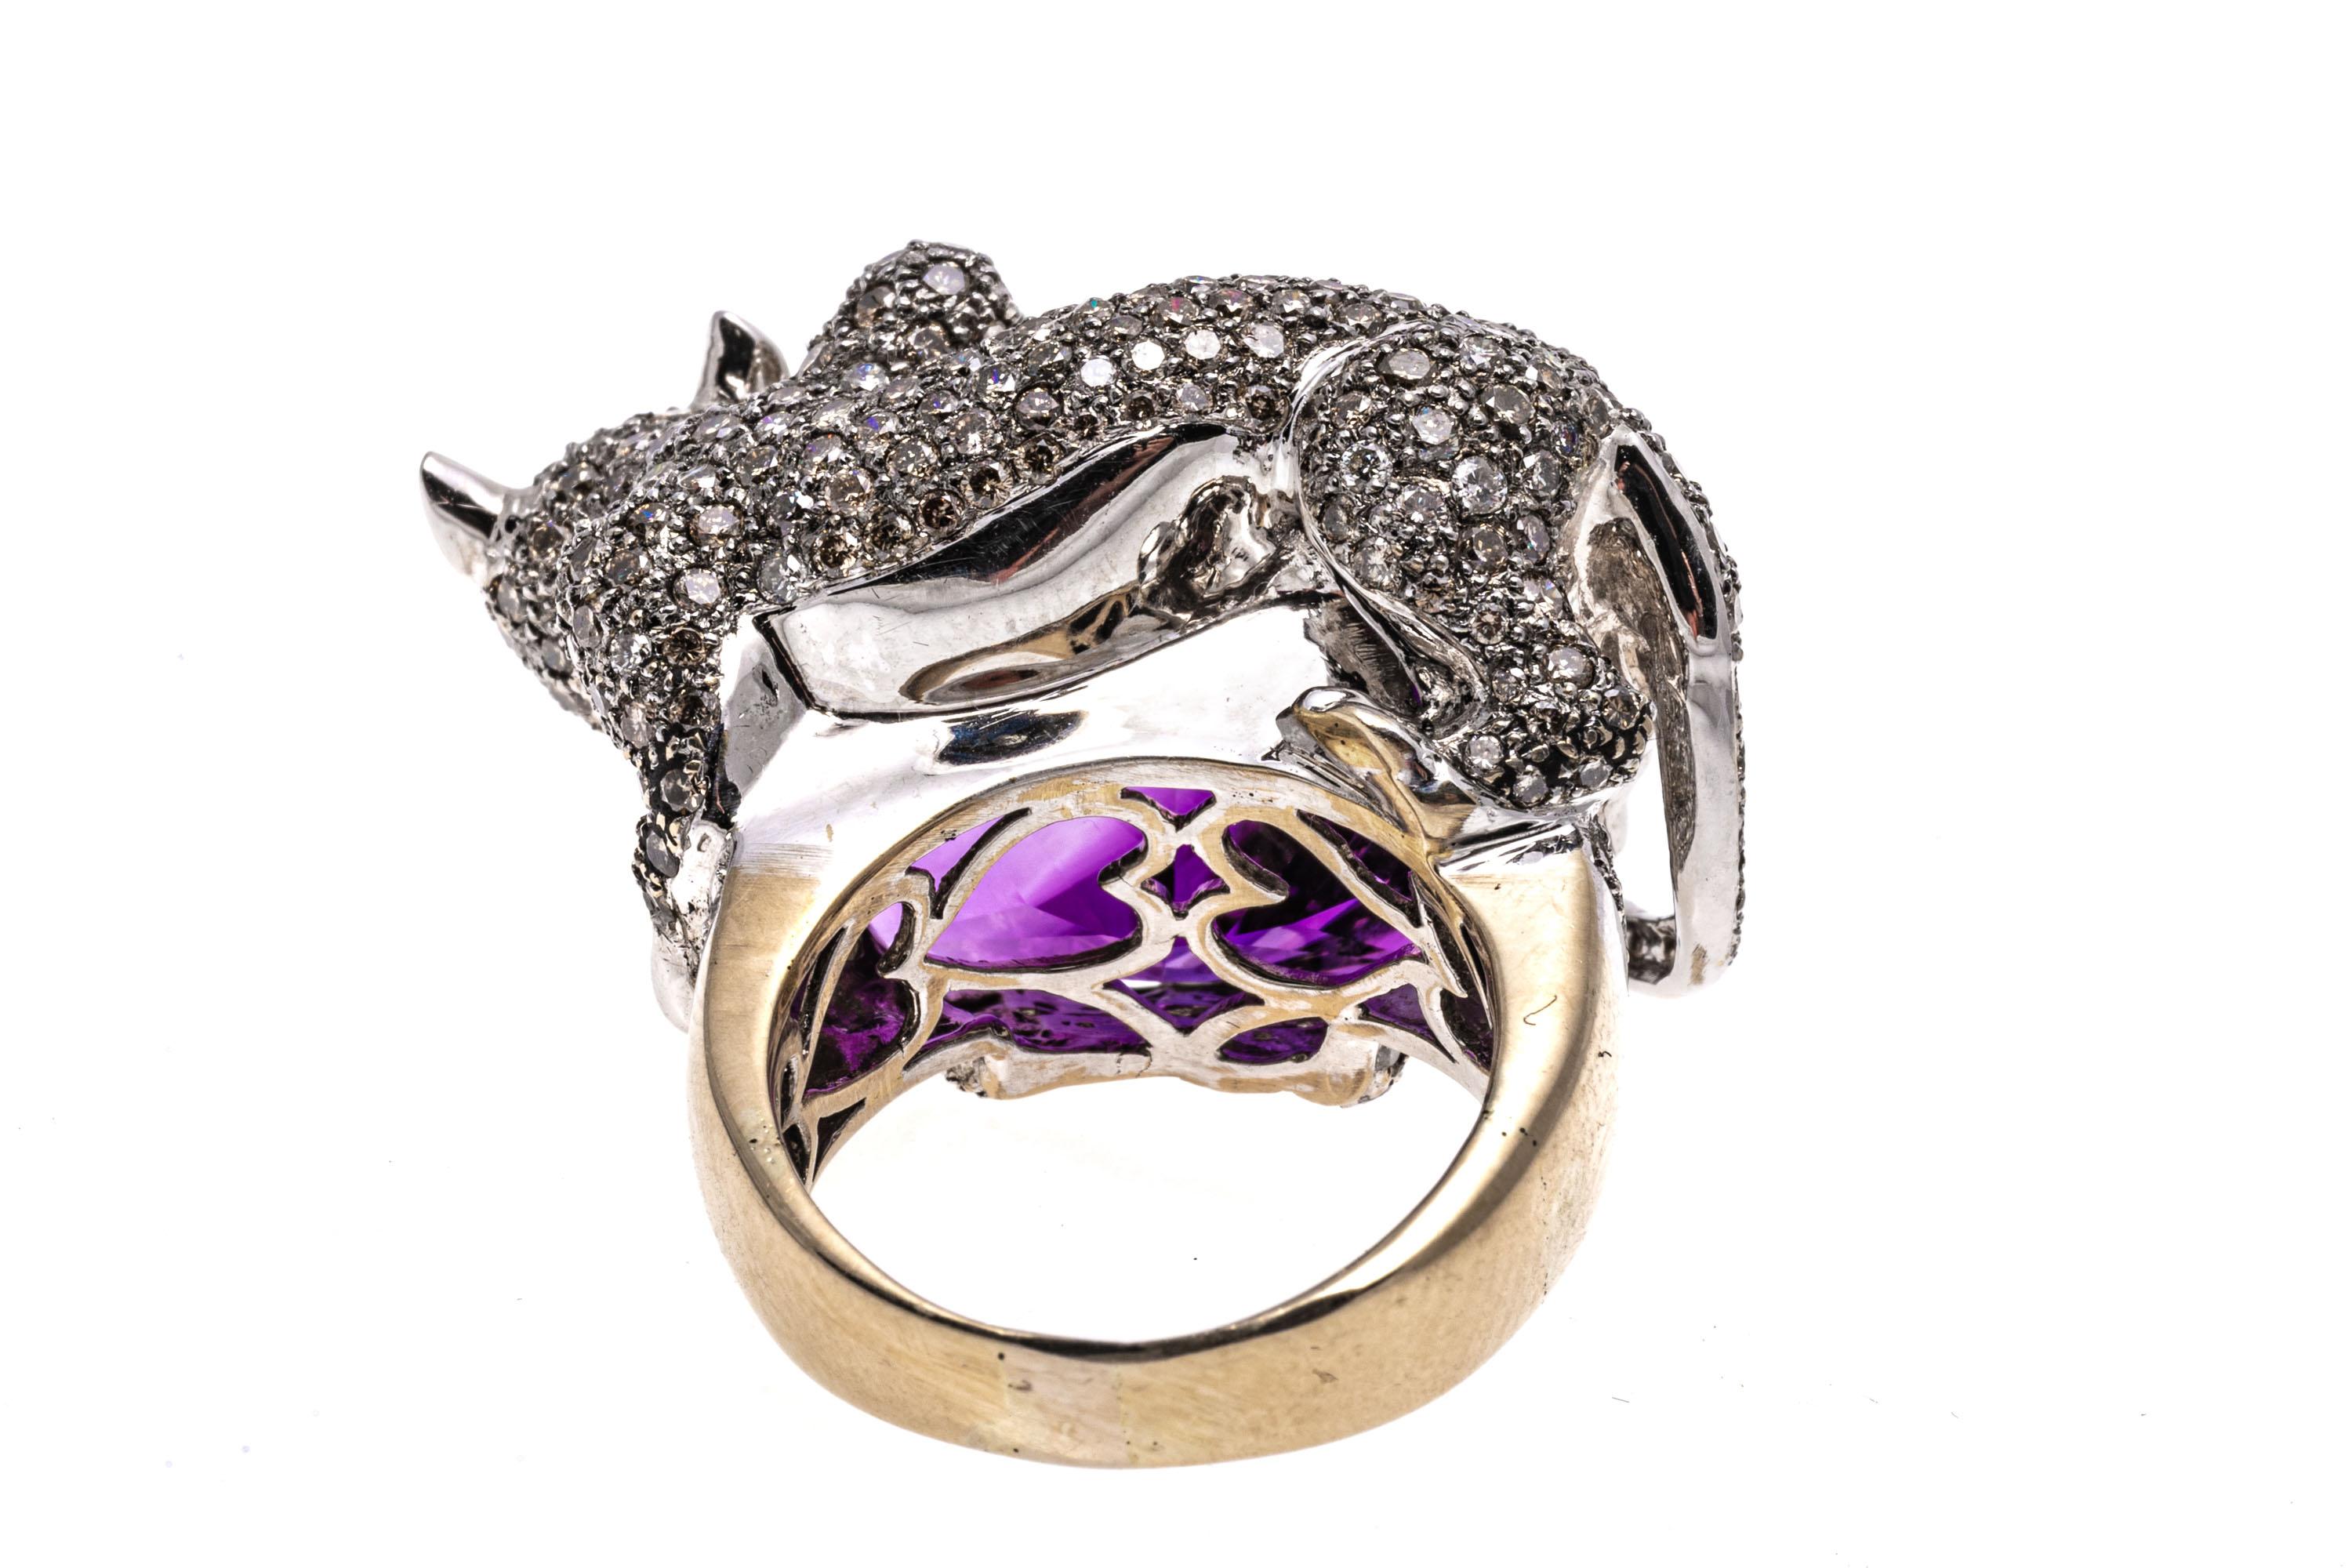 Women's 14k Gold Pave Diamond Panther Ring Atop An Amethyst, App. 13.64 CTS